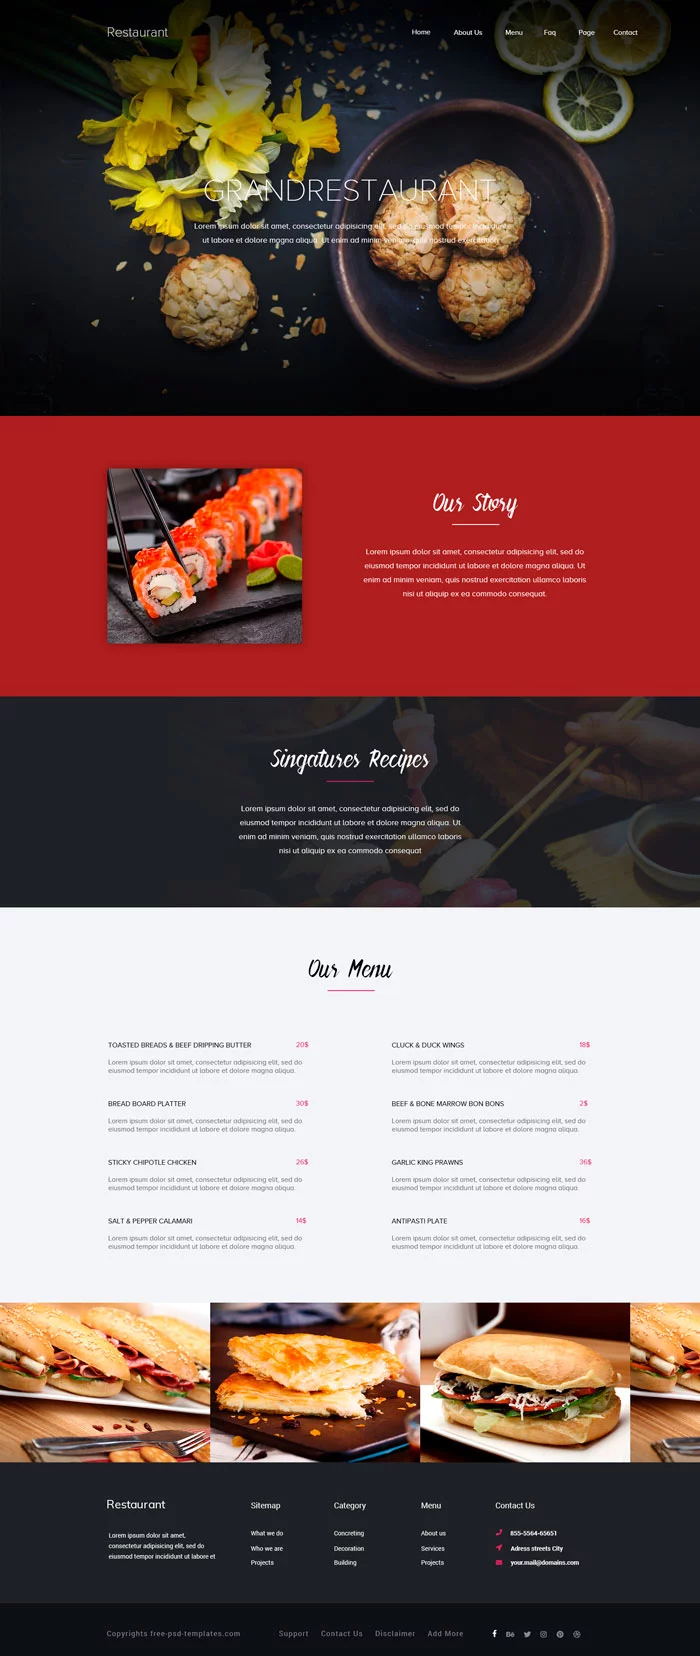 FREE PSD TEMPLATE LANDING PAGE